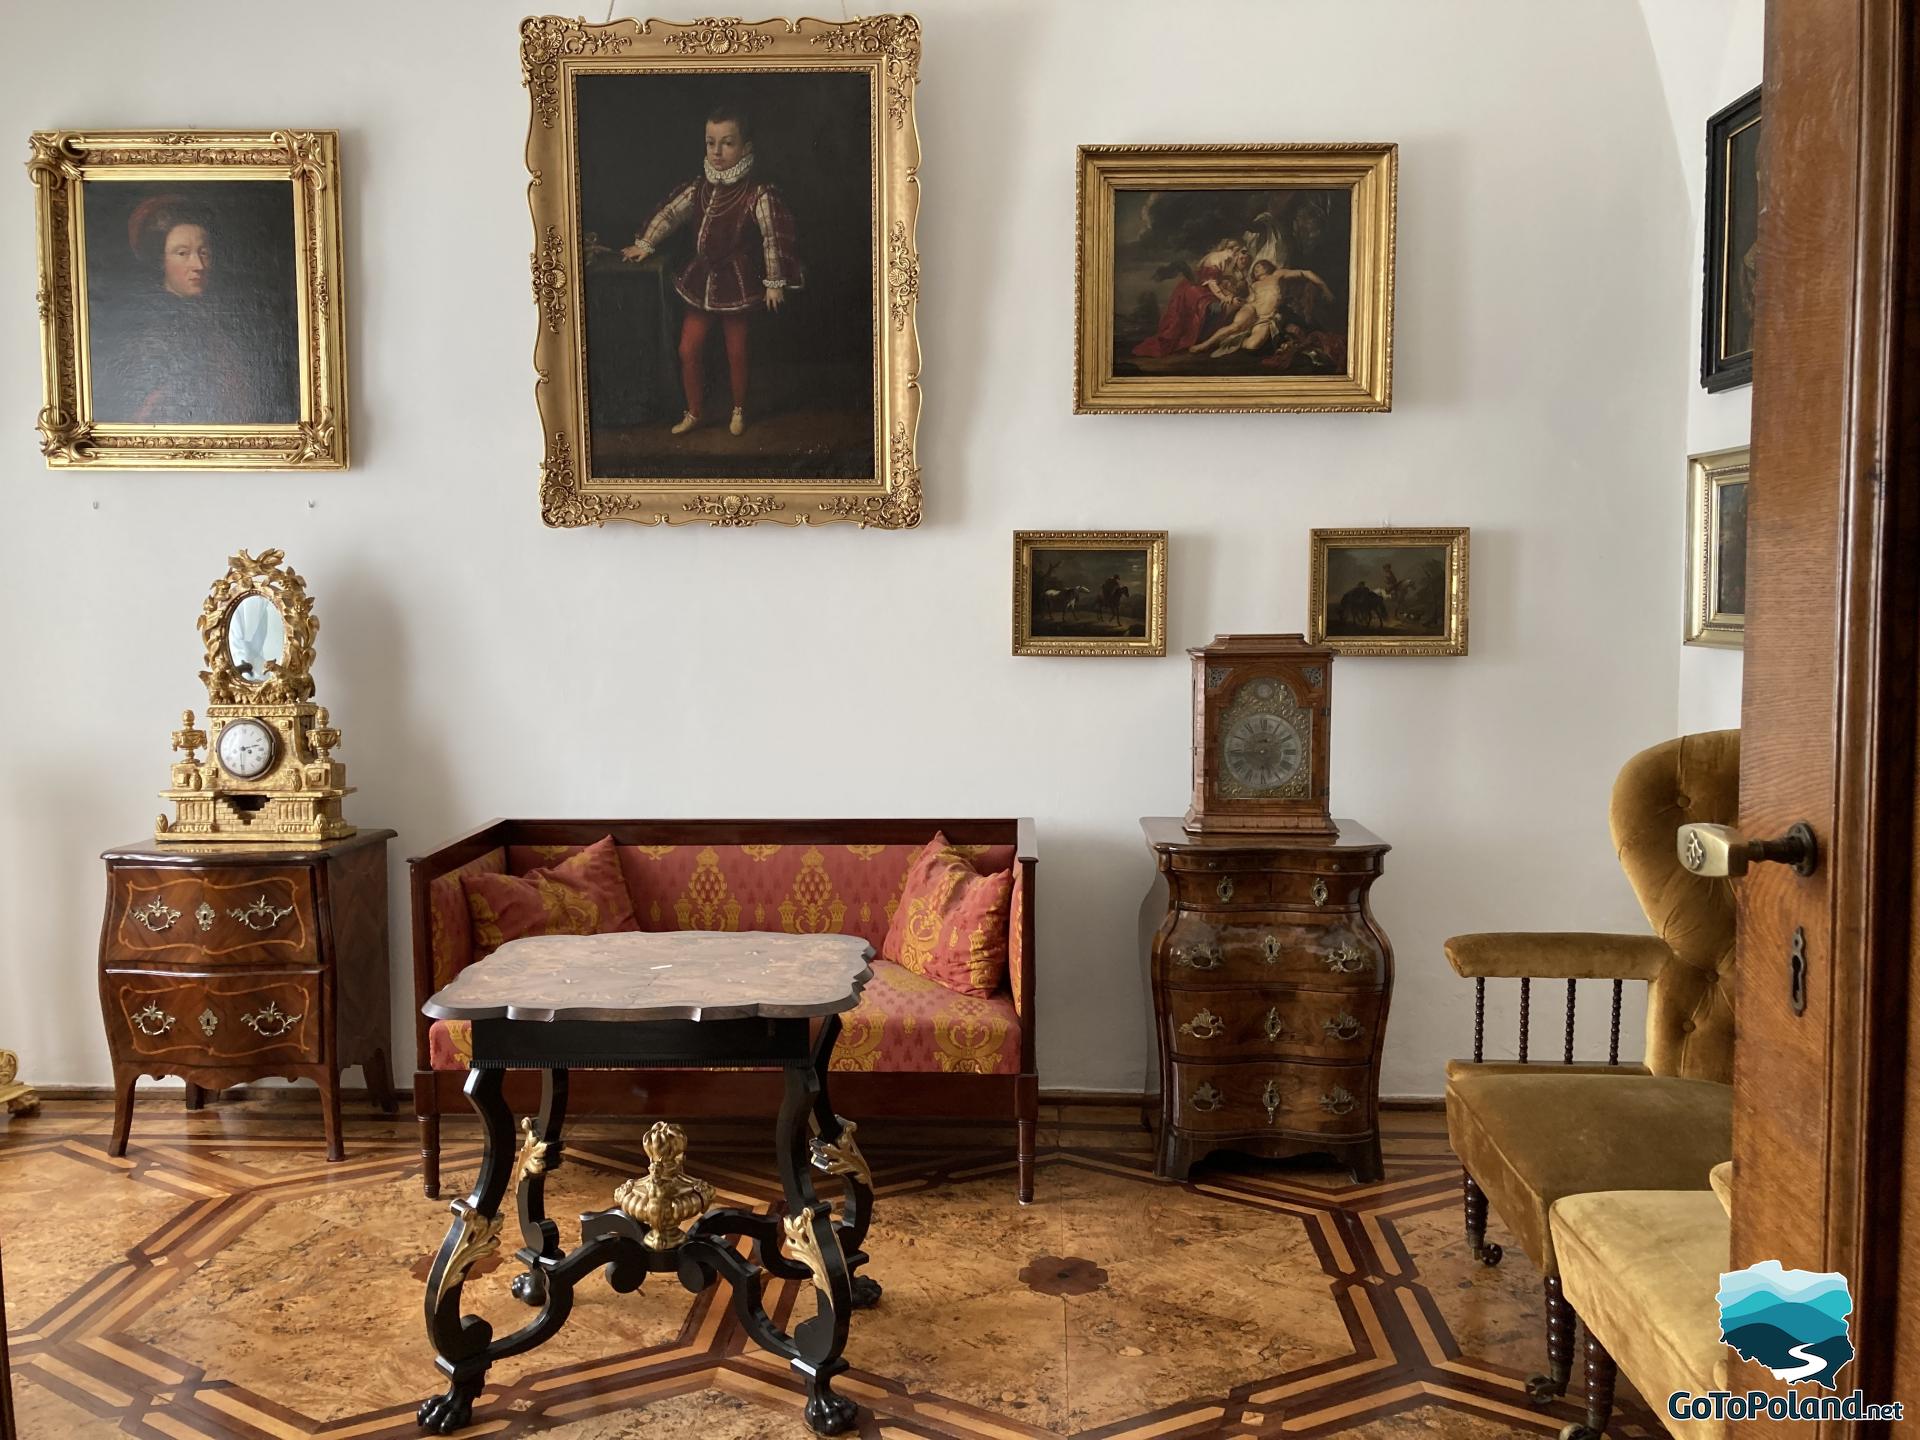 five paintings hanging on the wall, carved table, inlaid floor, two antique clocks 